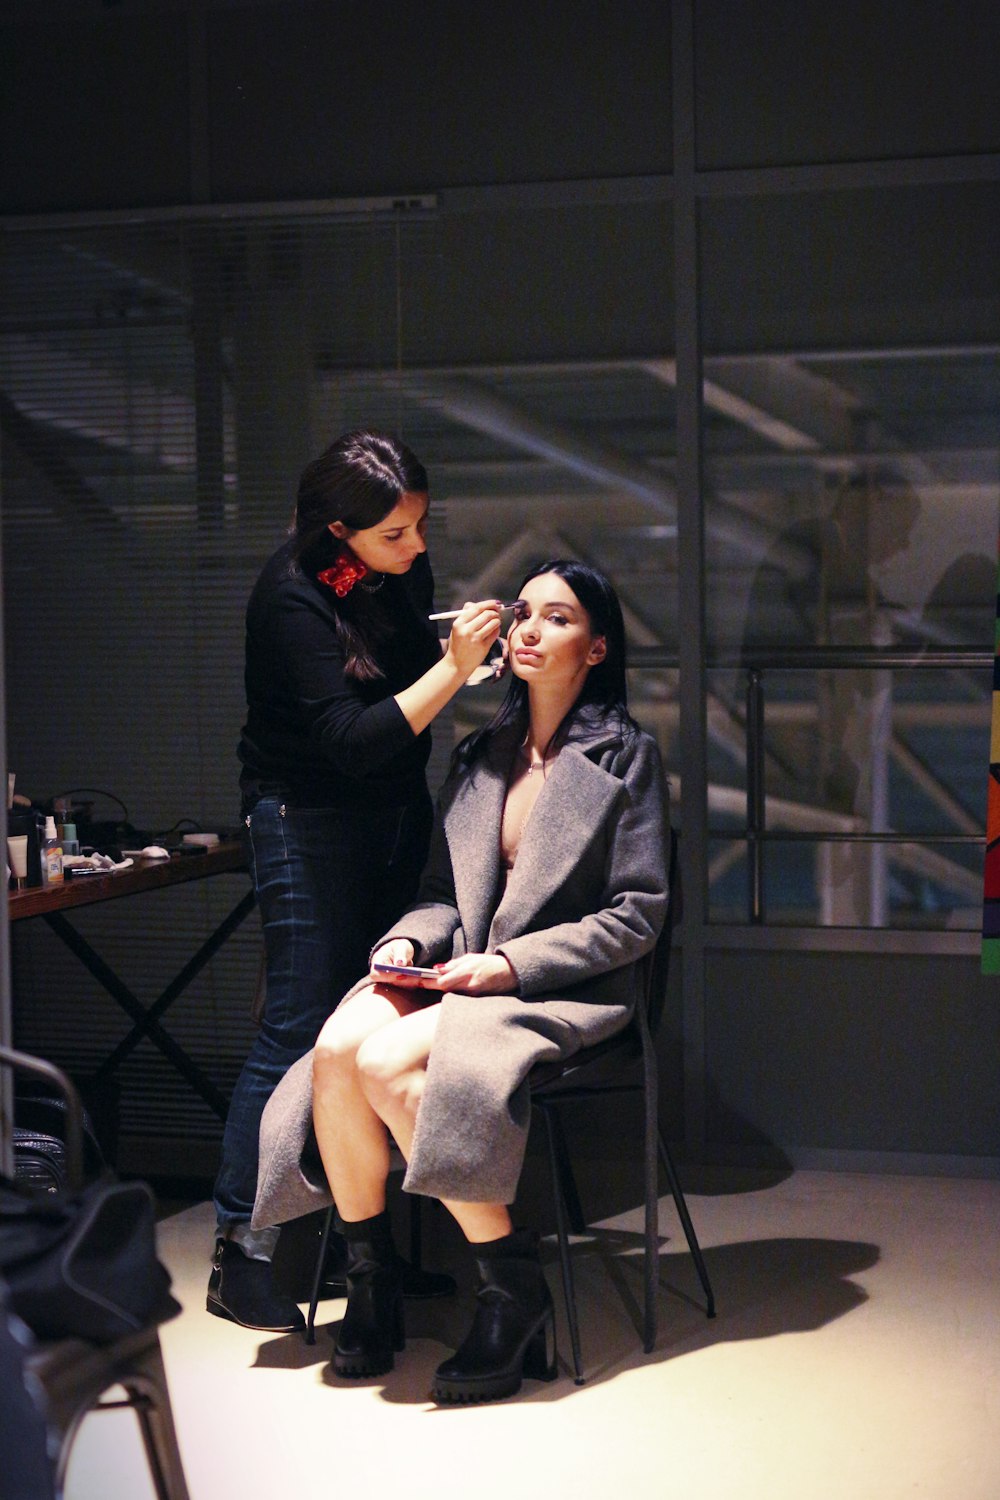 a woman getting her makeup done by another woman